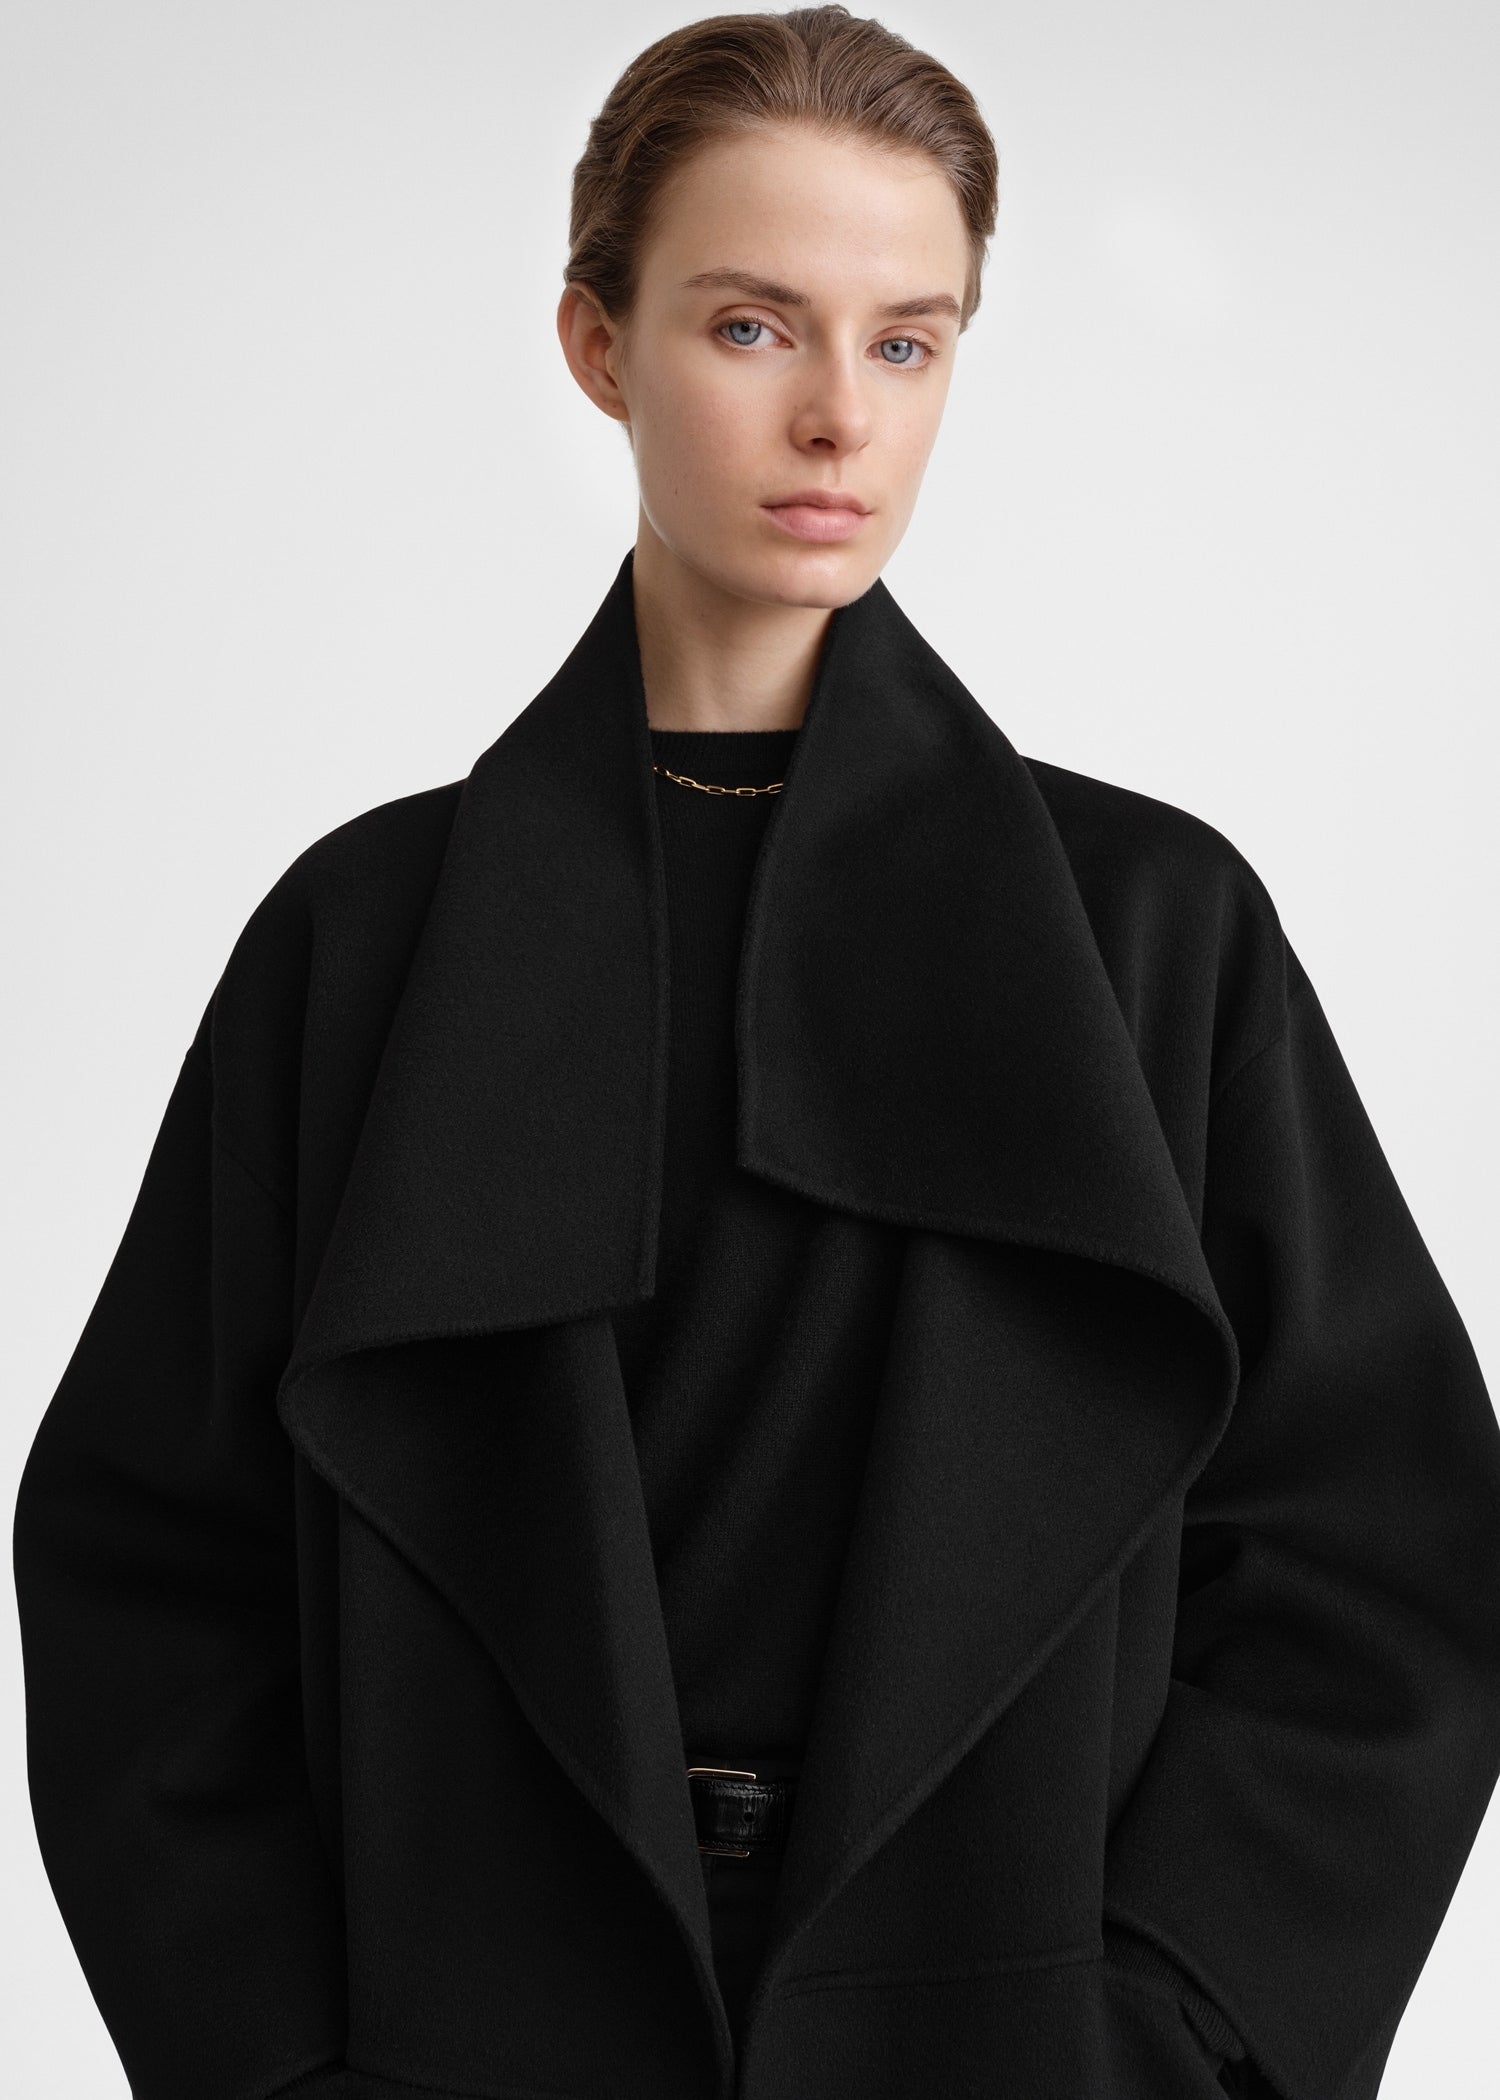 + NET SUSTAIN oversized wool and cashmere-blend coat